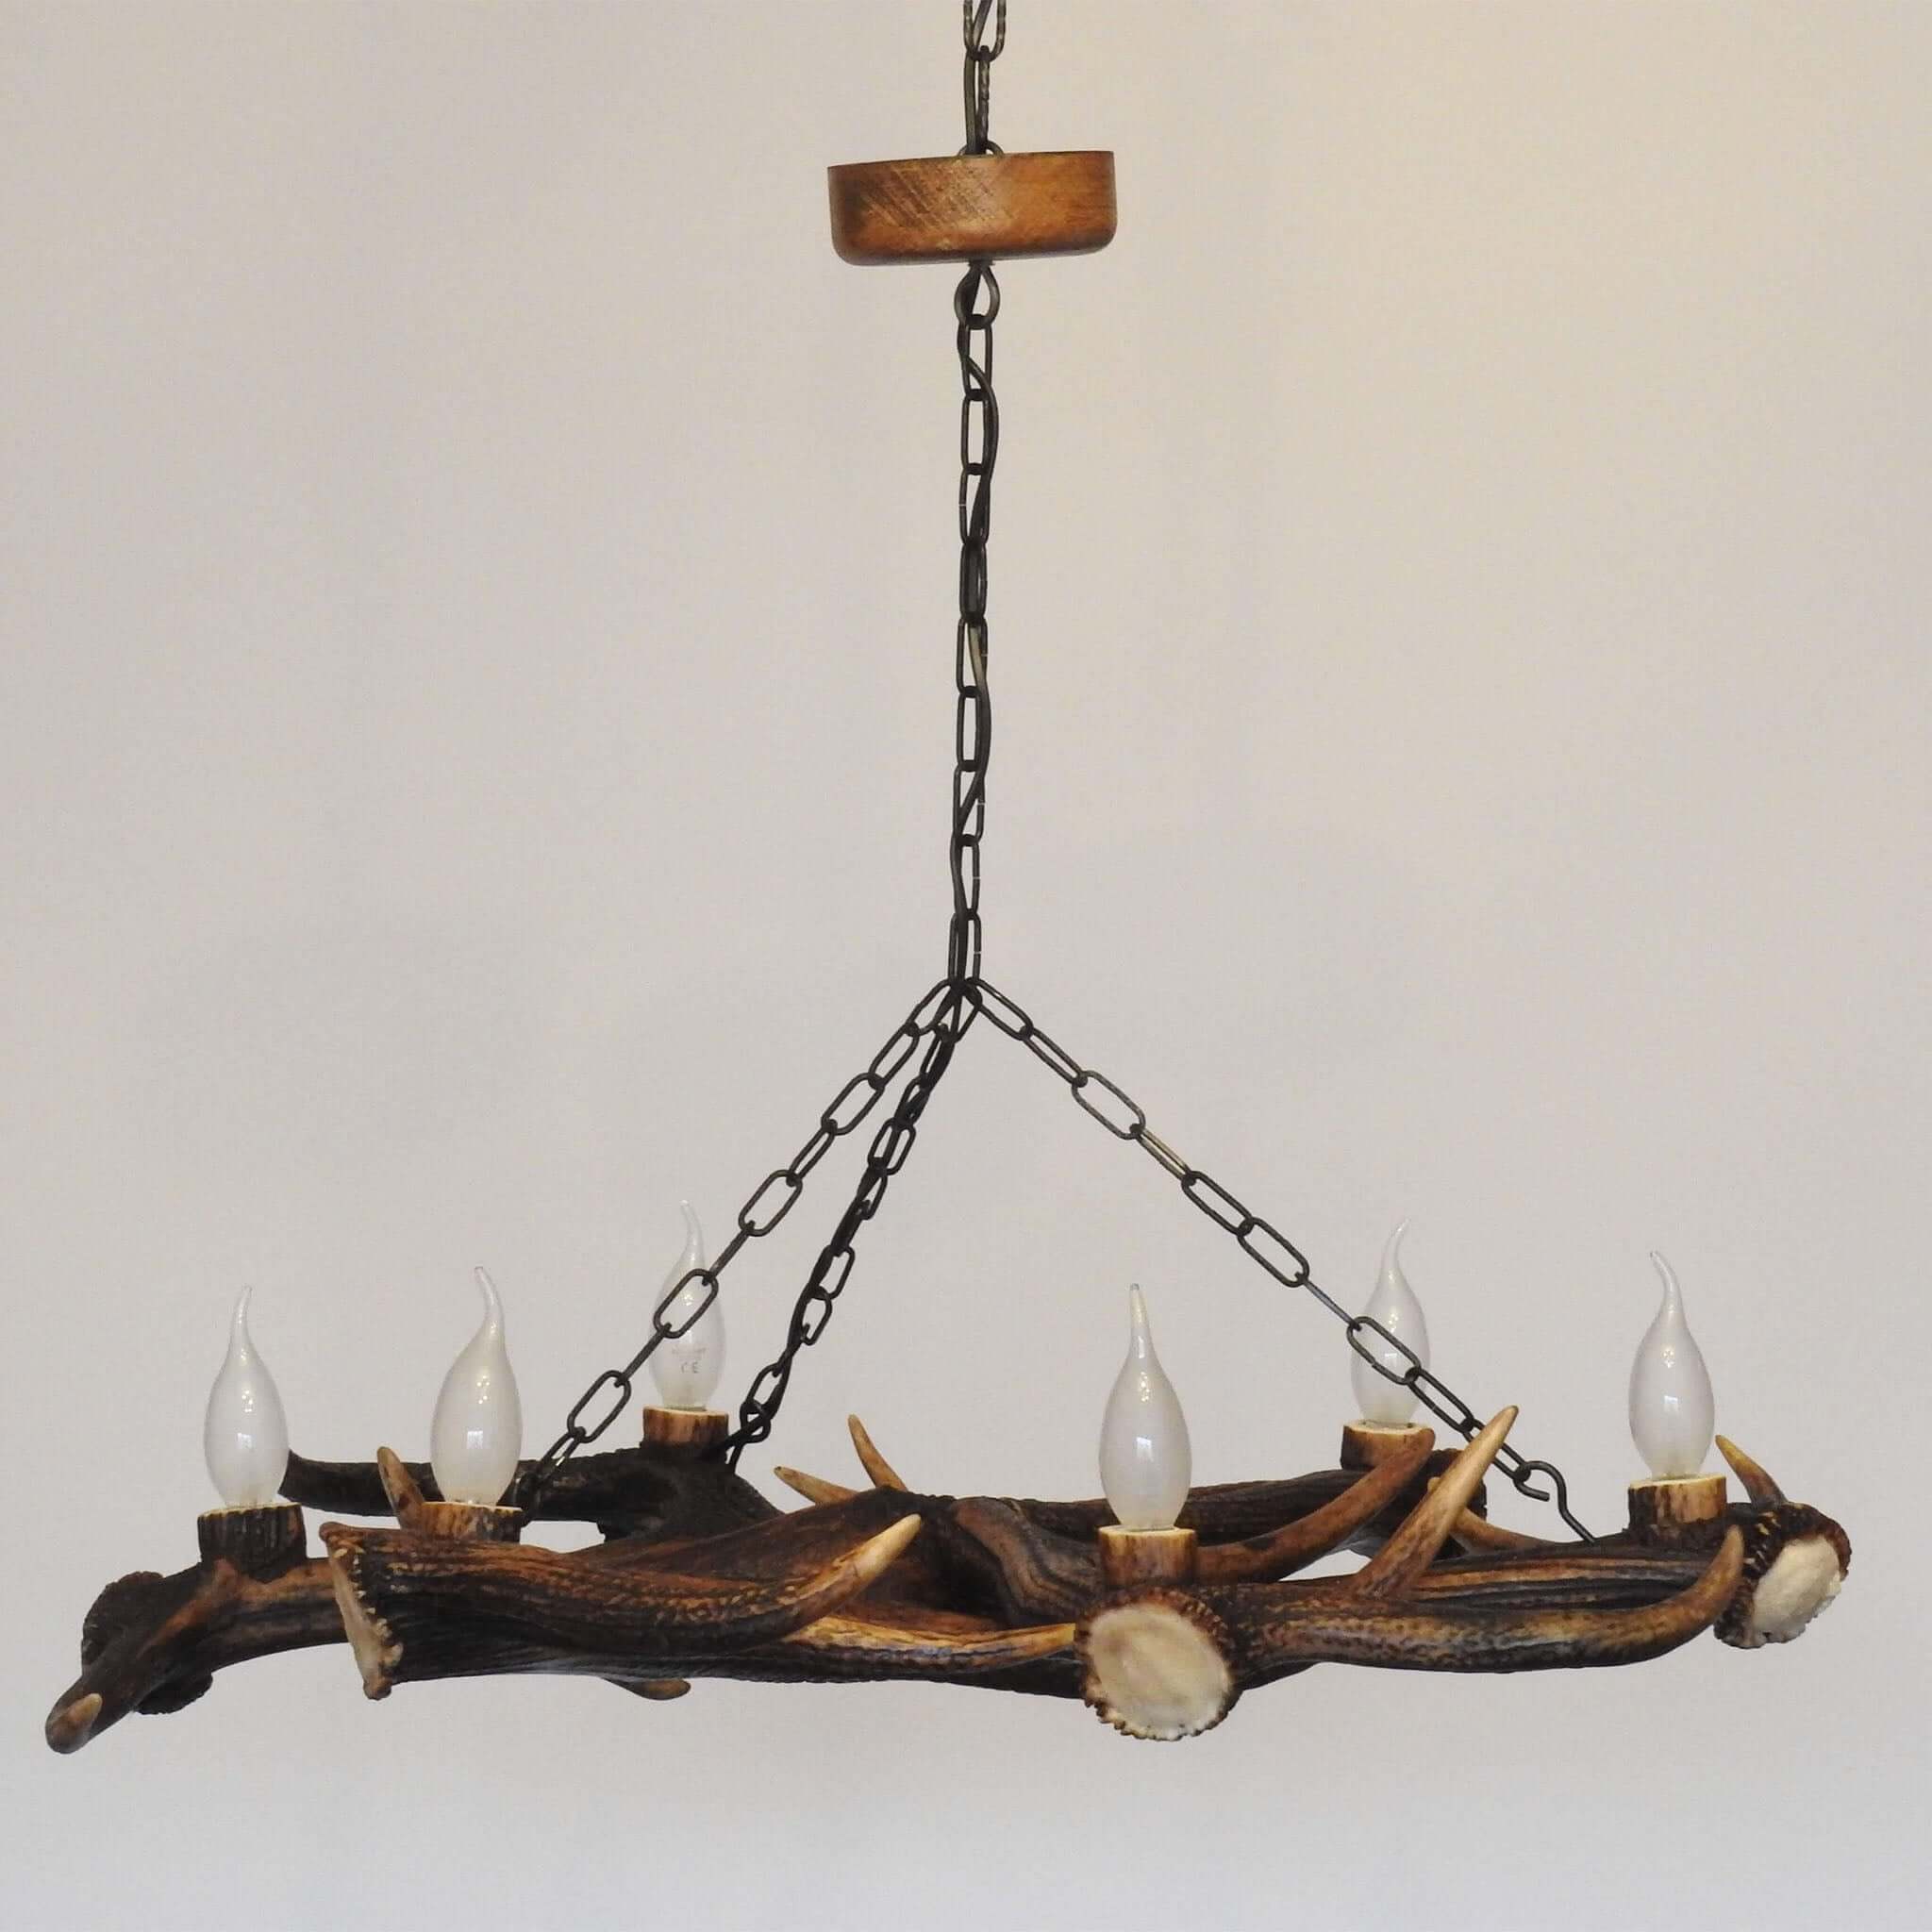 Antler chandelier hanging on chain.